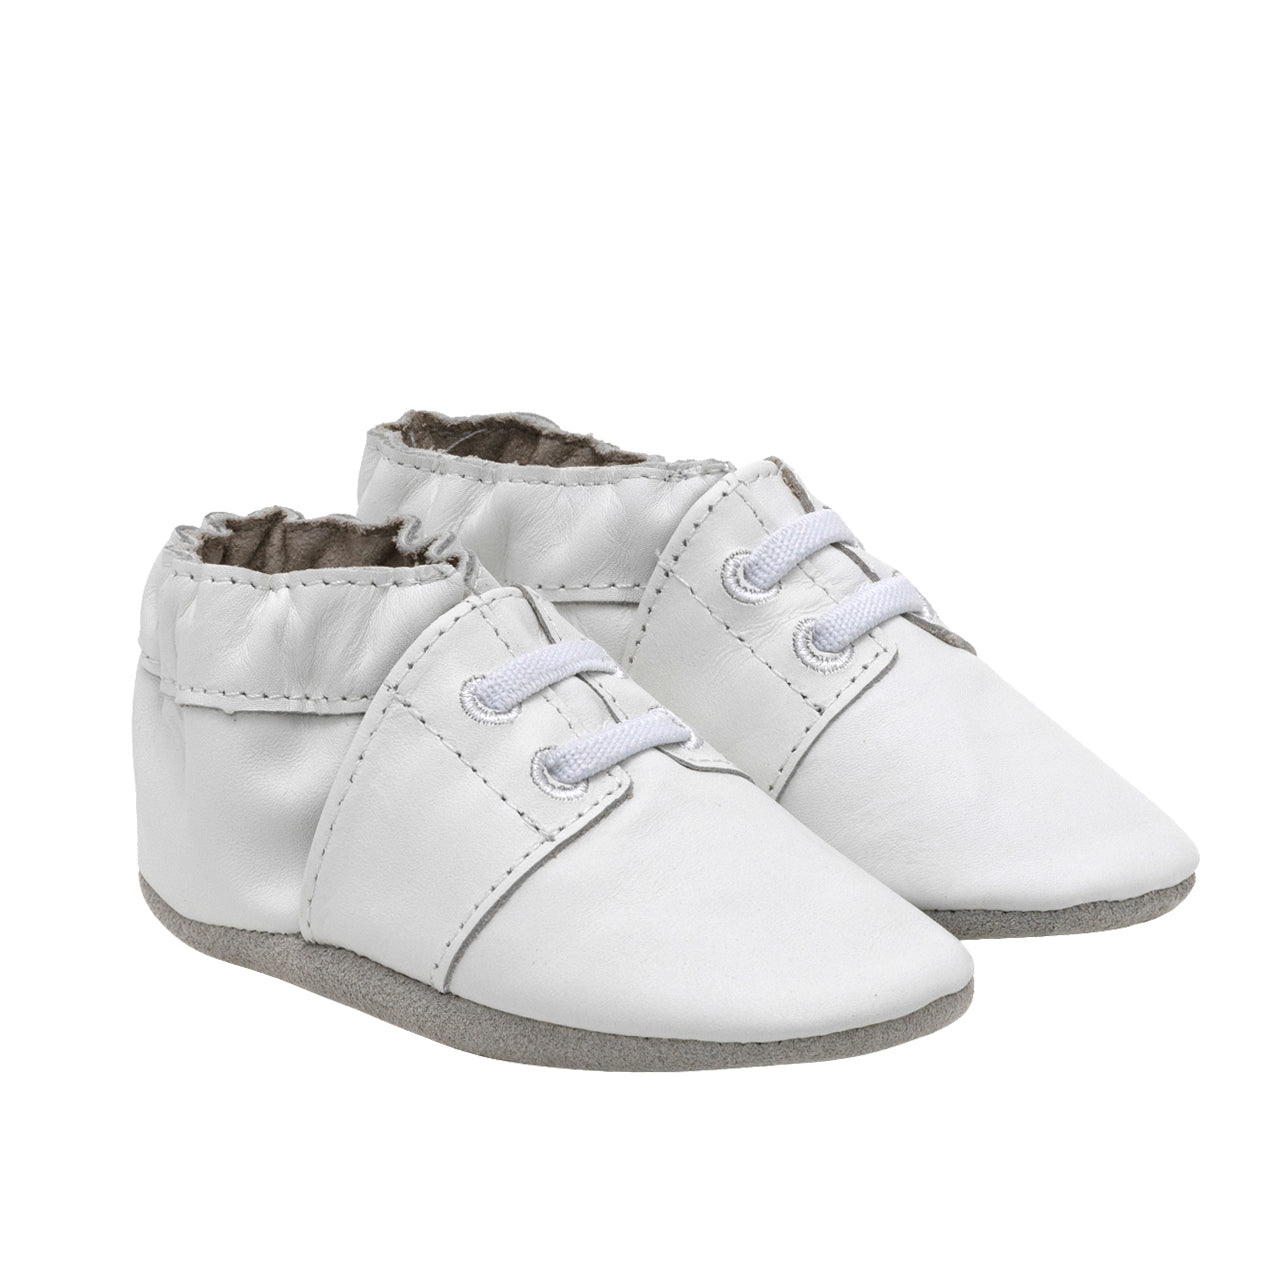 Robeez Special Occasion Soft Soles White